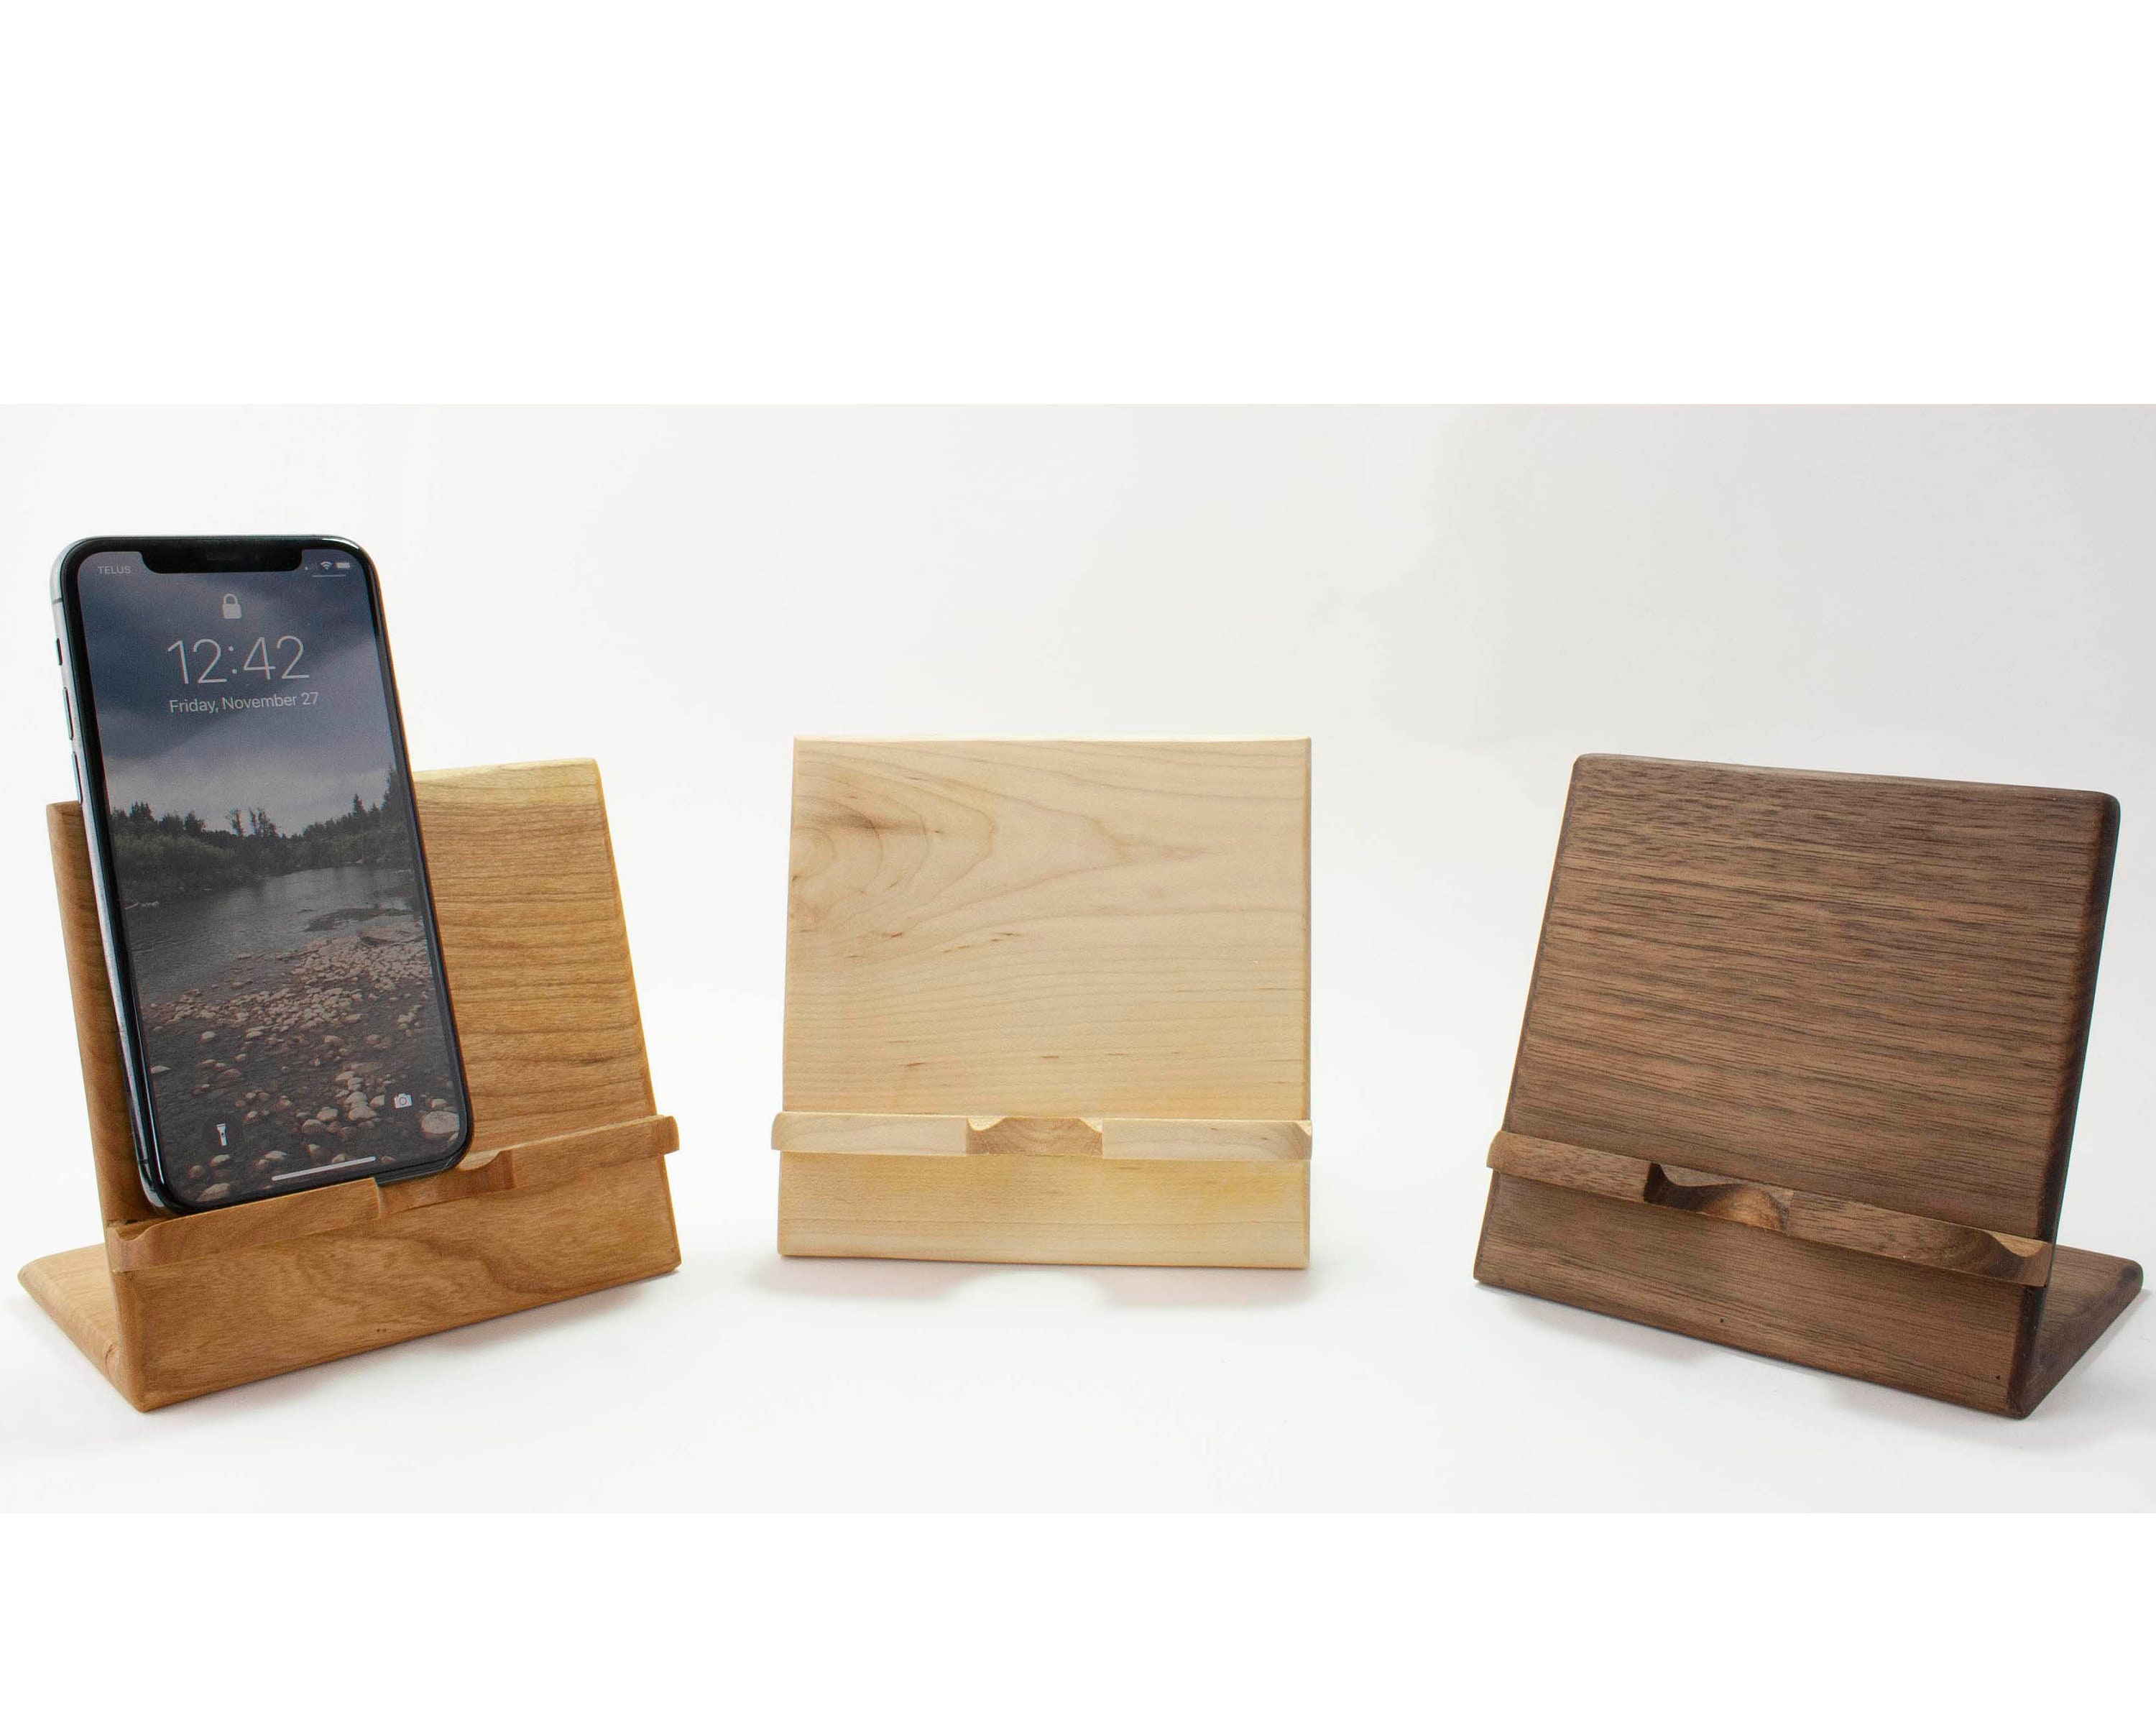 Wood Phone Stand, Wooden Phone Stand, Desktop Phone Holder, Mobile Phone Holder Double Groove Design (Set of 2)